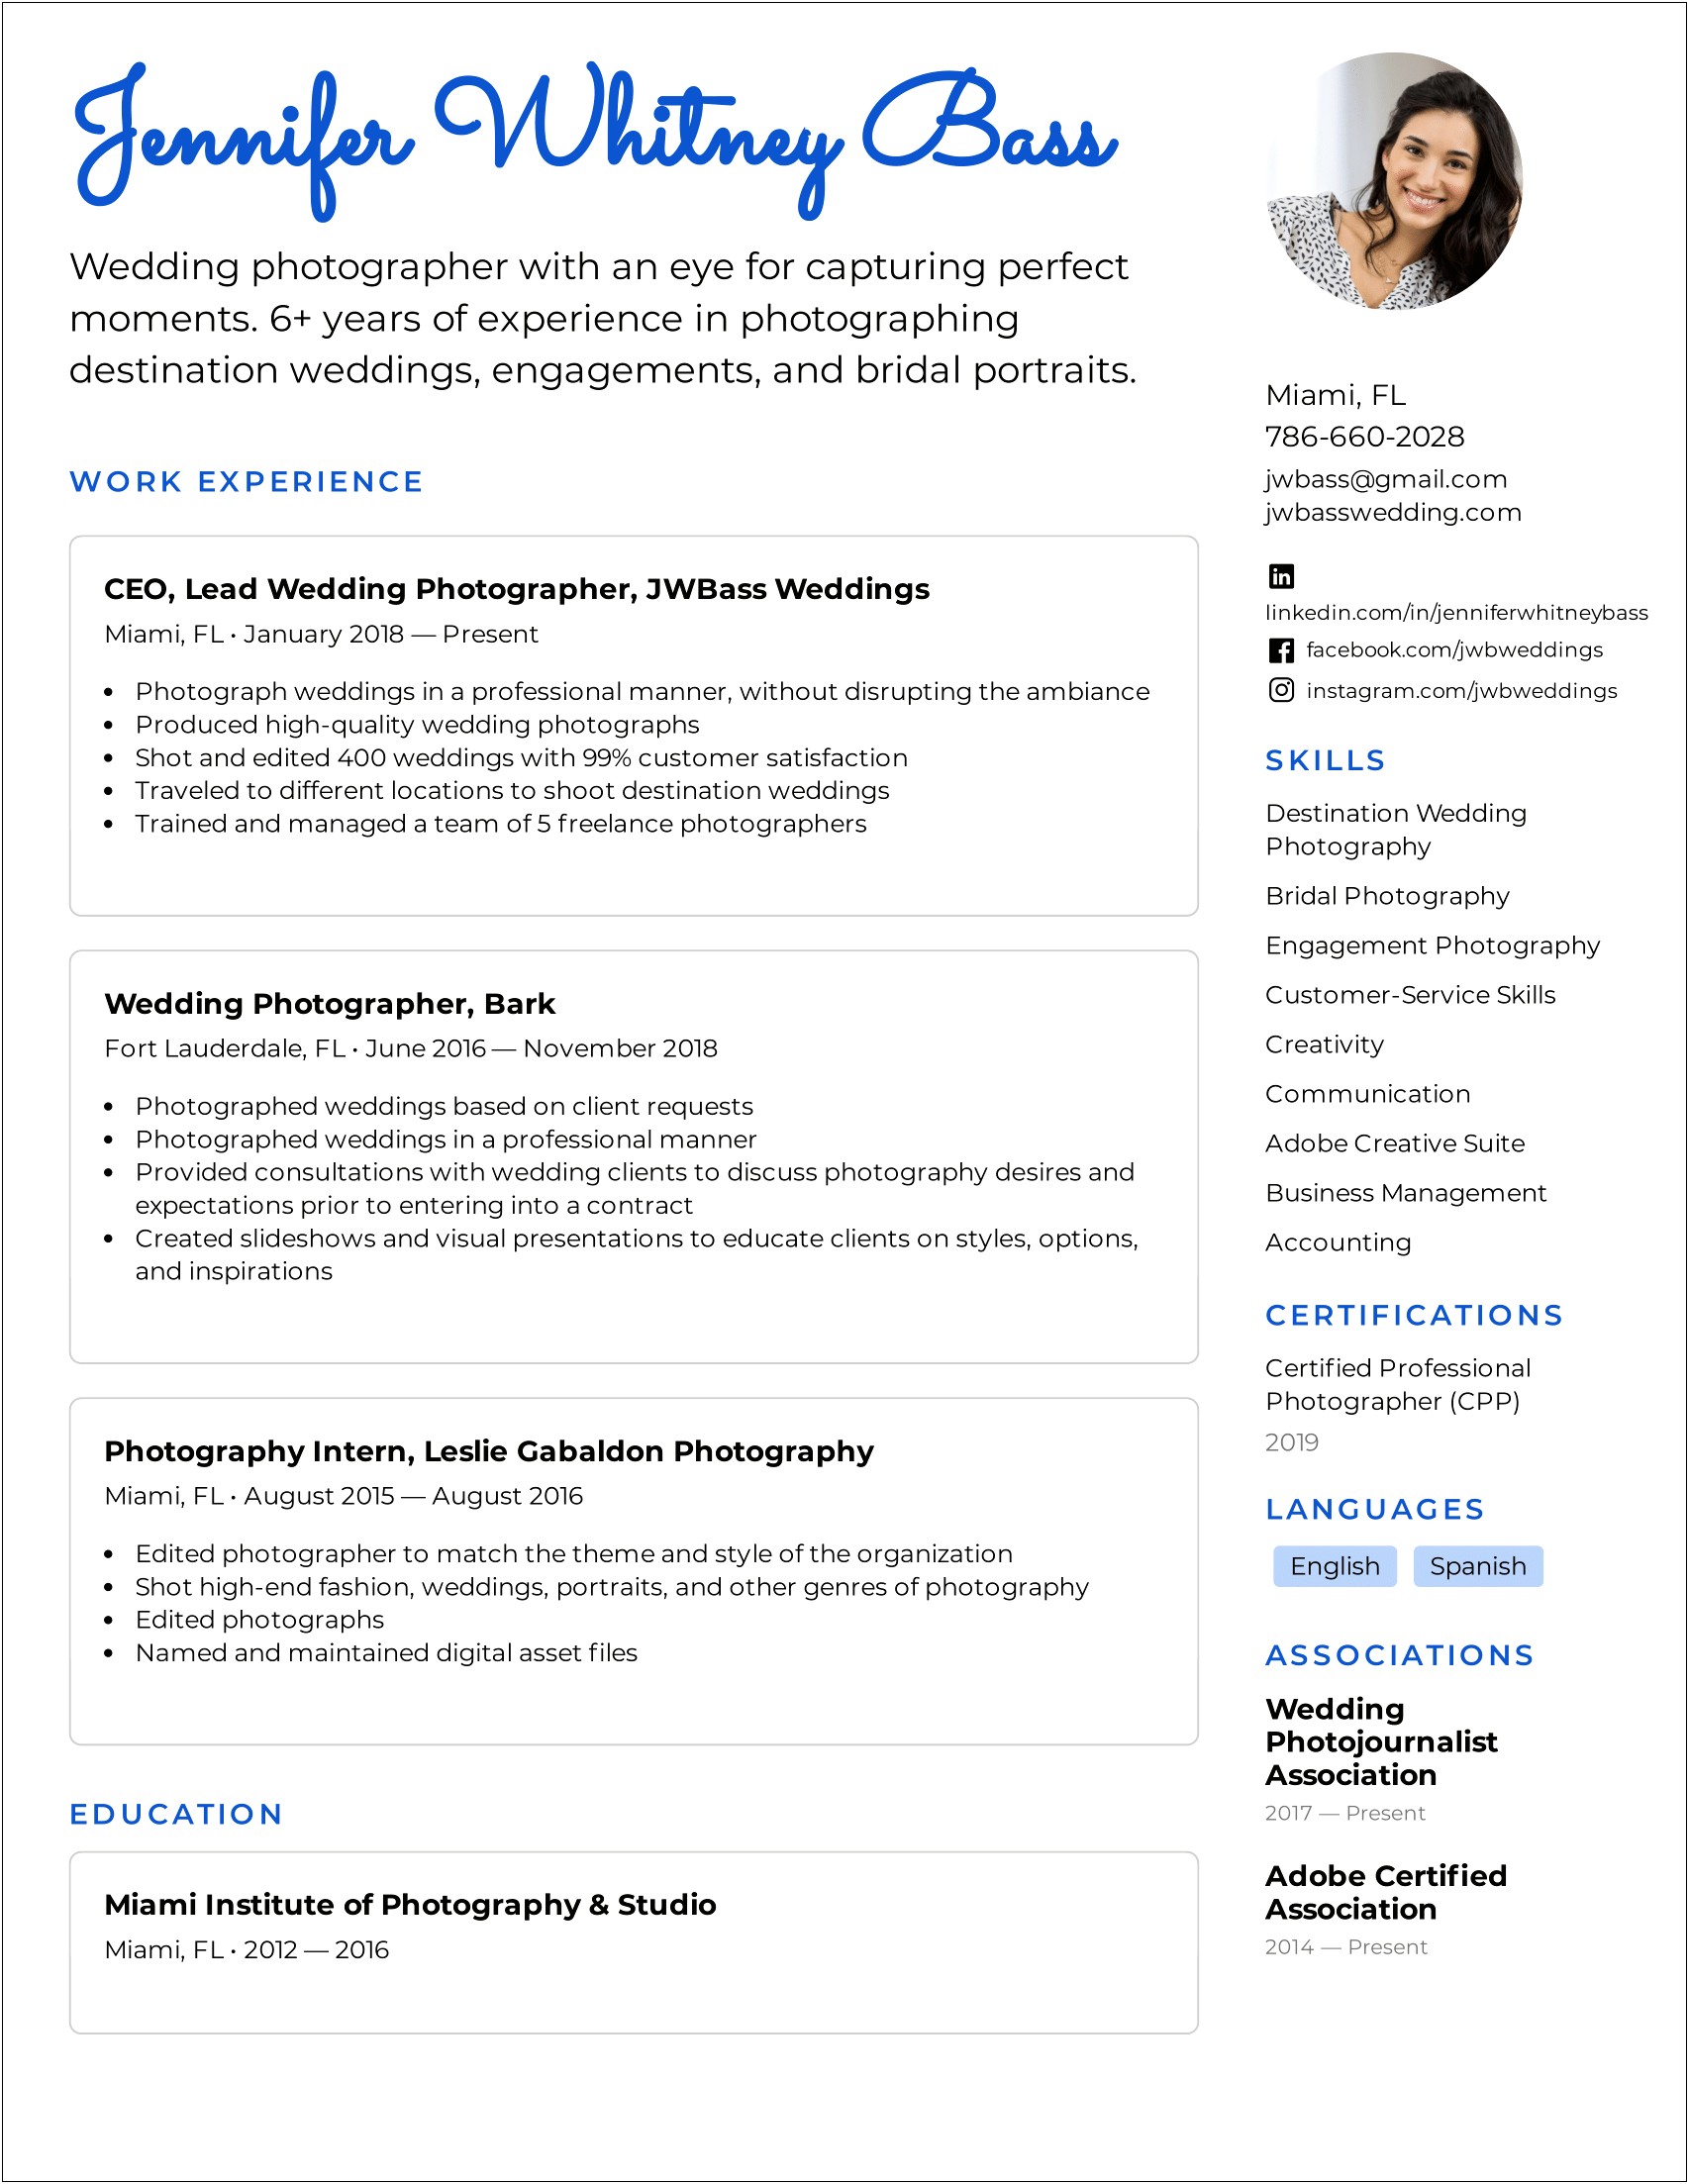 Examples Of Summaries In Photographer Resumes